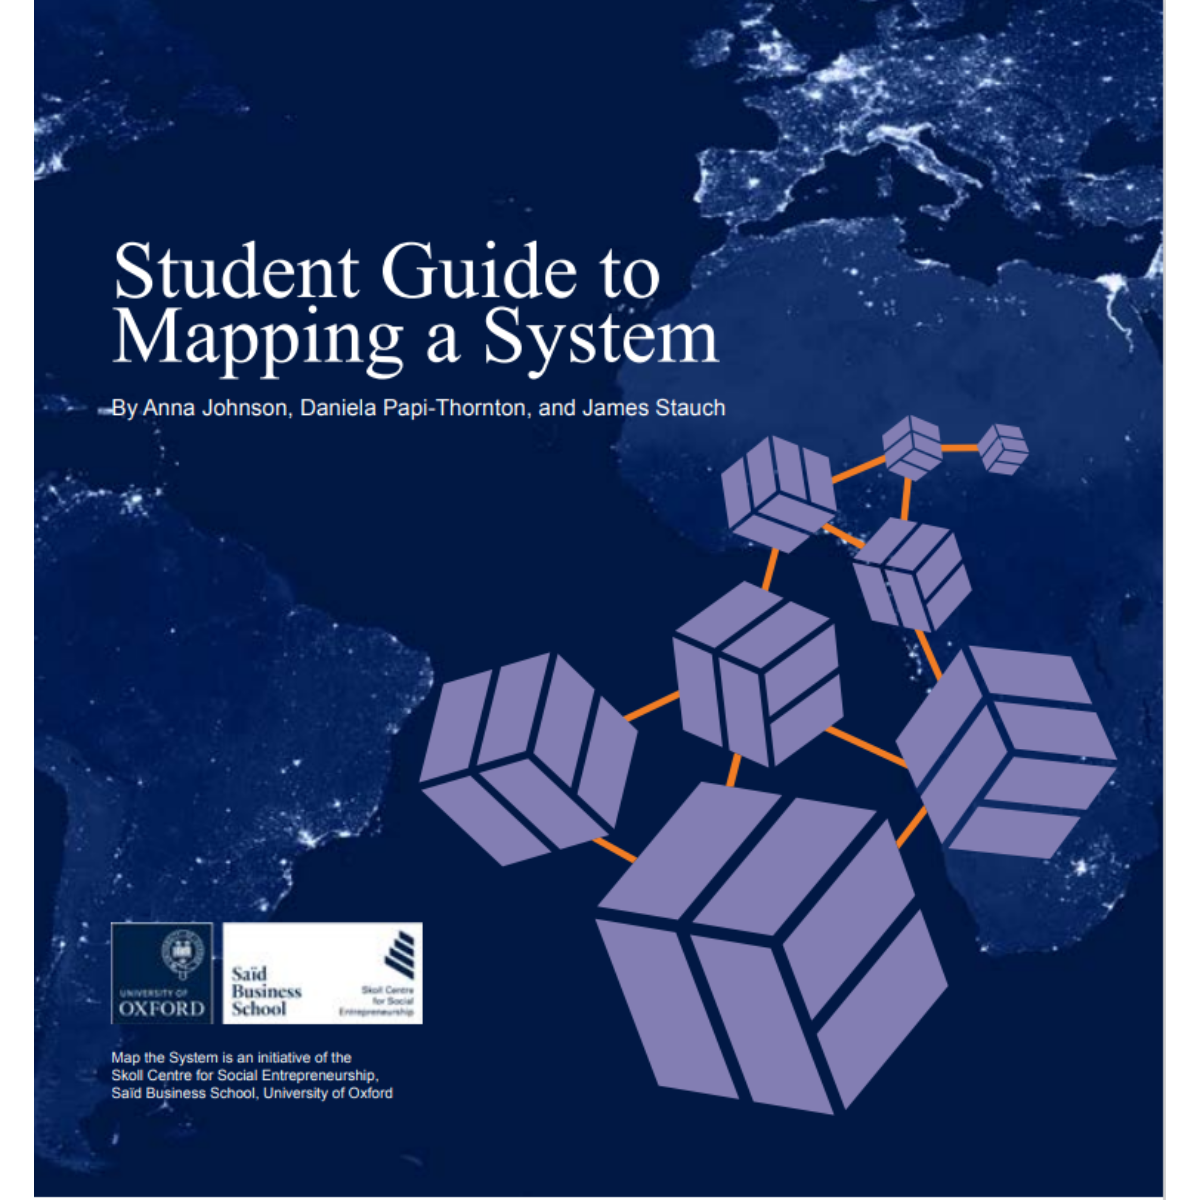 MTS Resources: Student Guide to Mapping the System